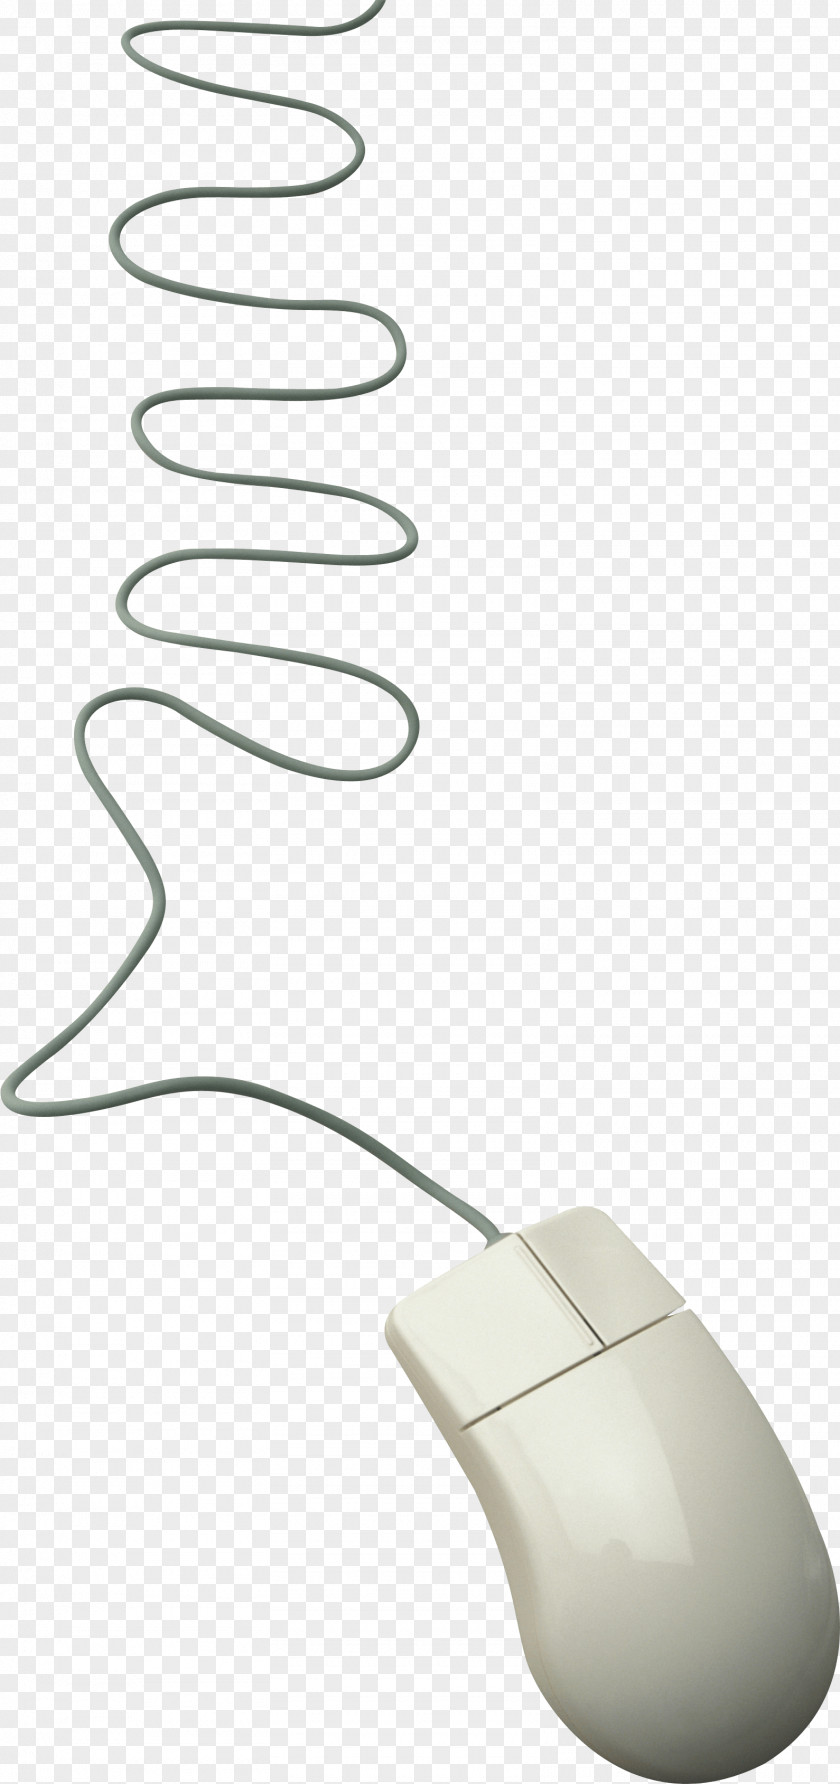 White Computer Mouse Image Download PNG